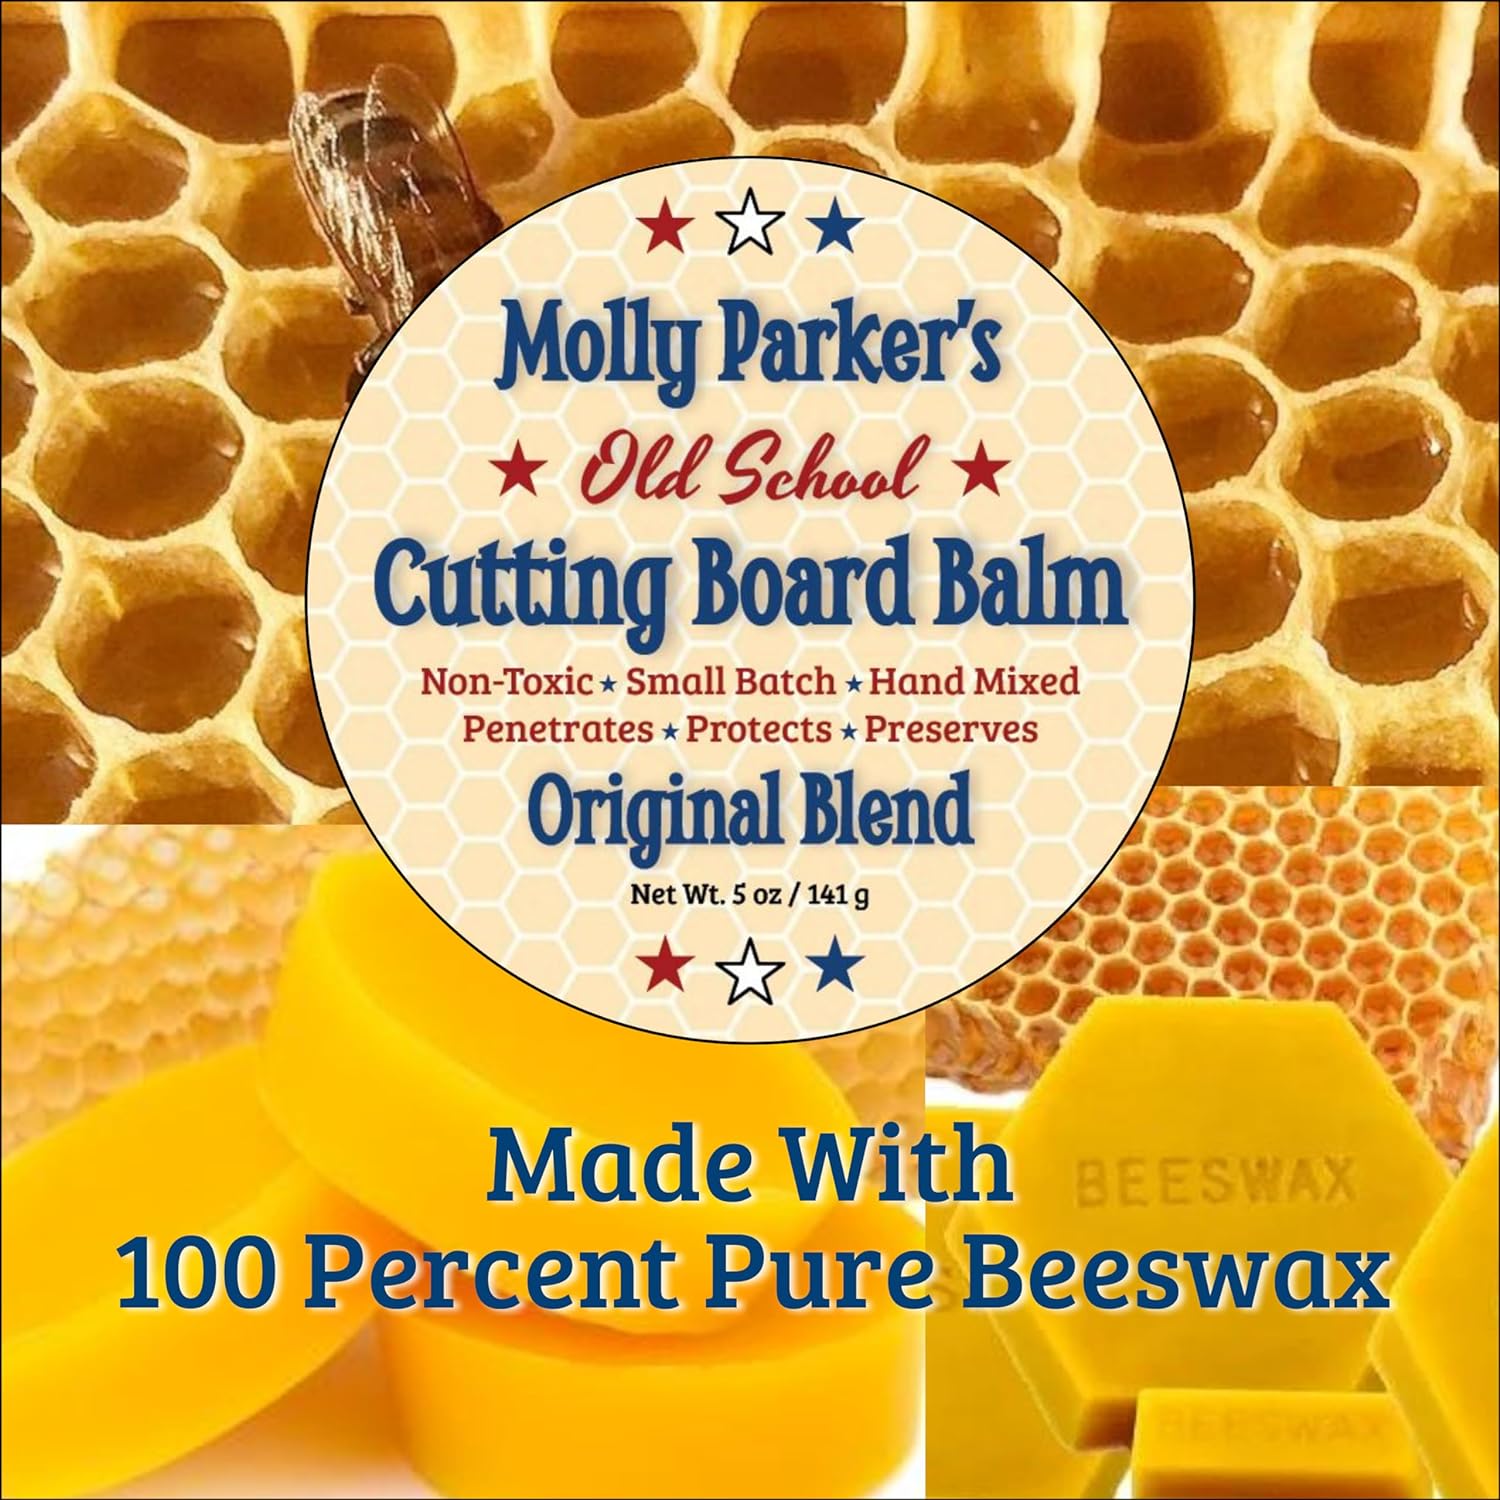 Molly Parker's Old School Cutting Board Balm - Wood Finish - Cutting Board Sealer - Non Toxic - Beeswax - Food Safe - Made in America : Health & Household